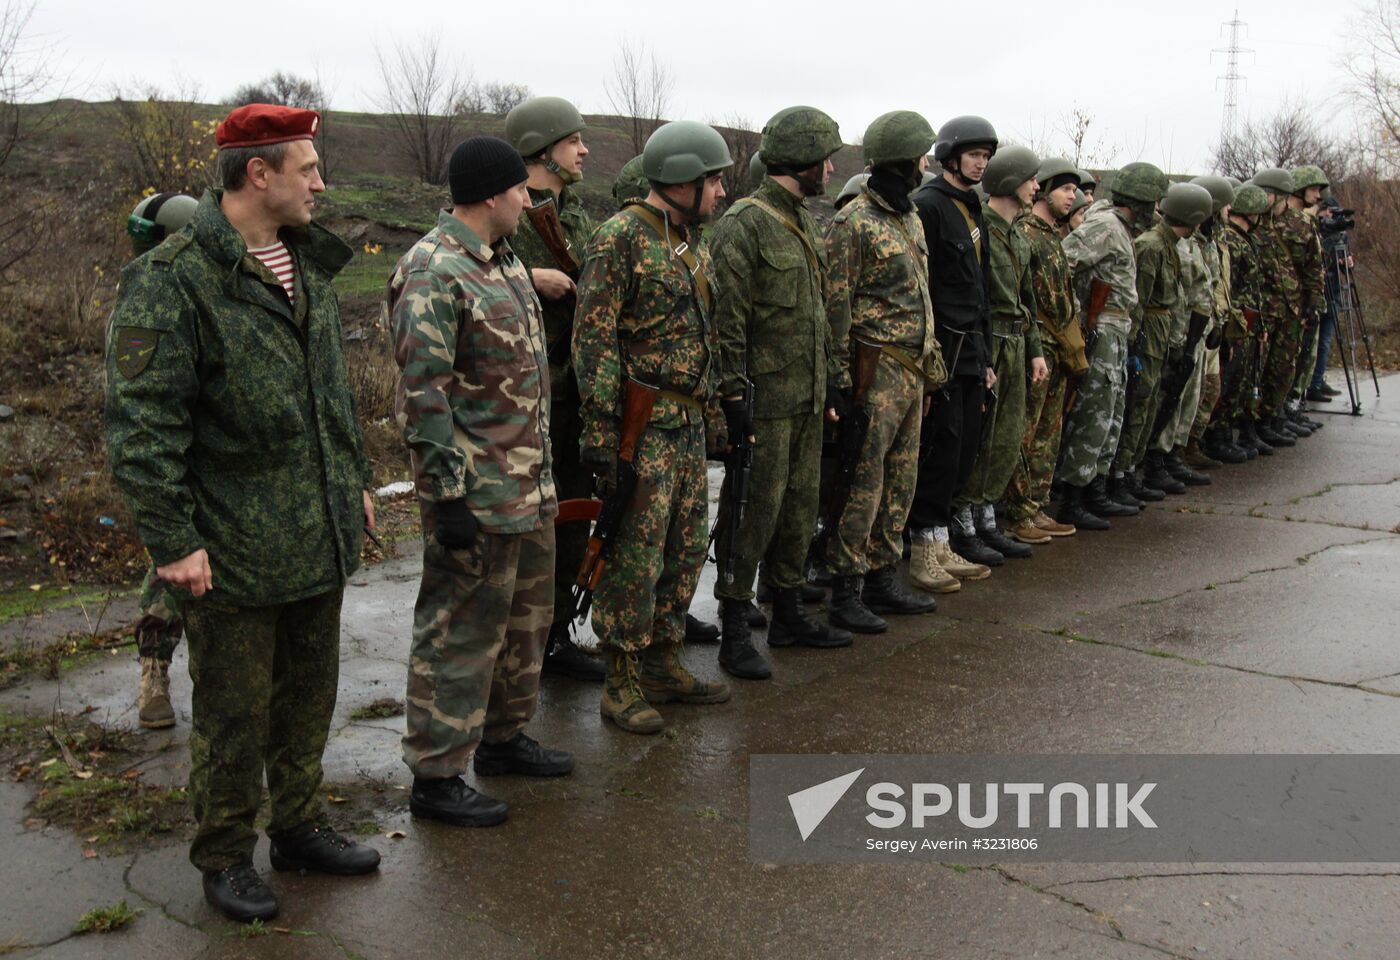 DPR fighters pass certification to wear a blue beret